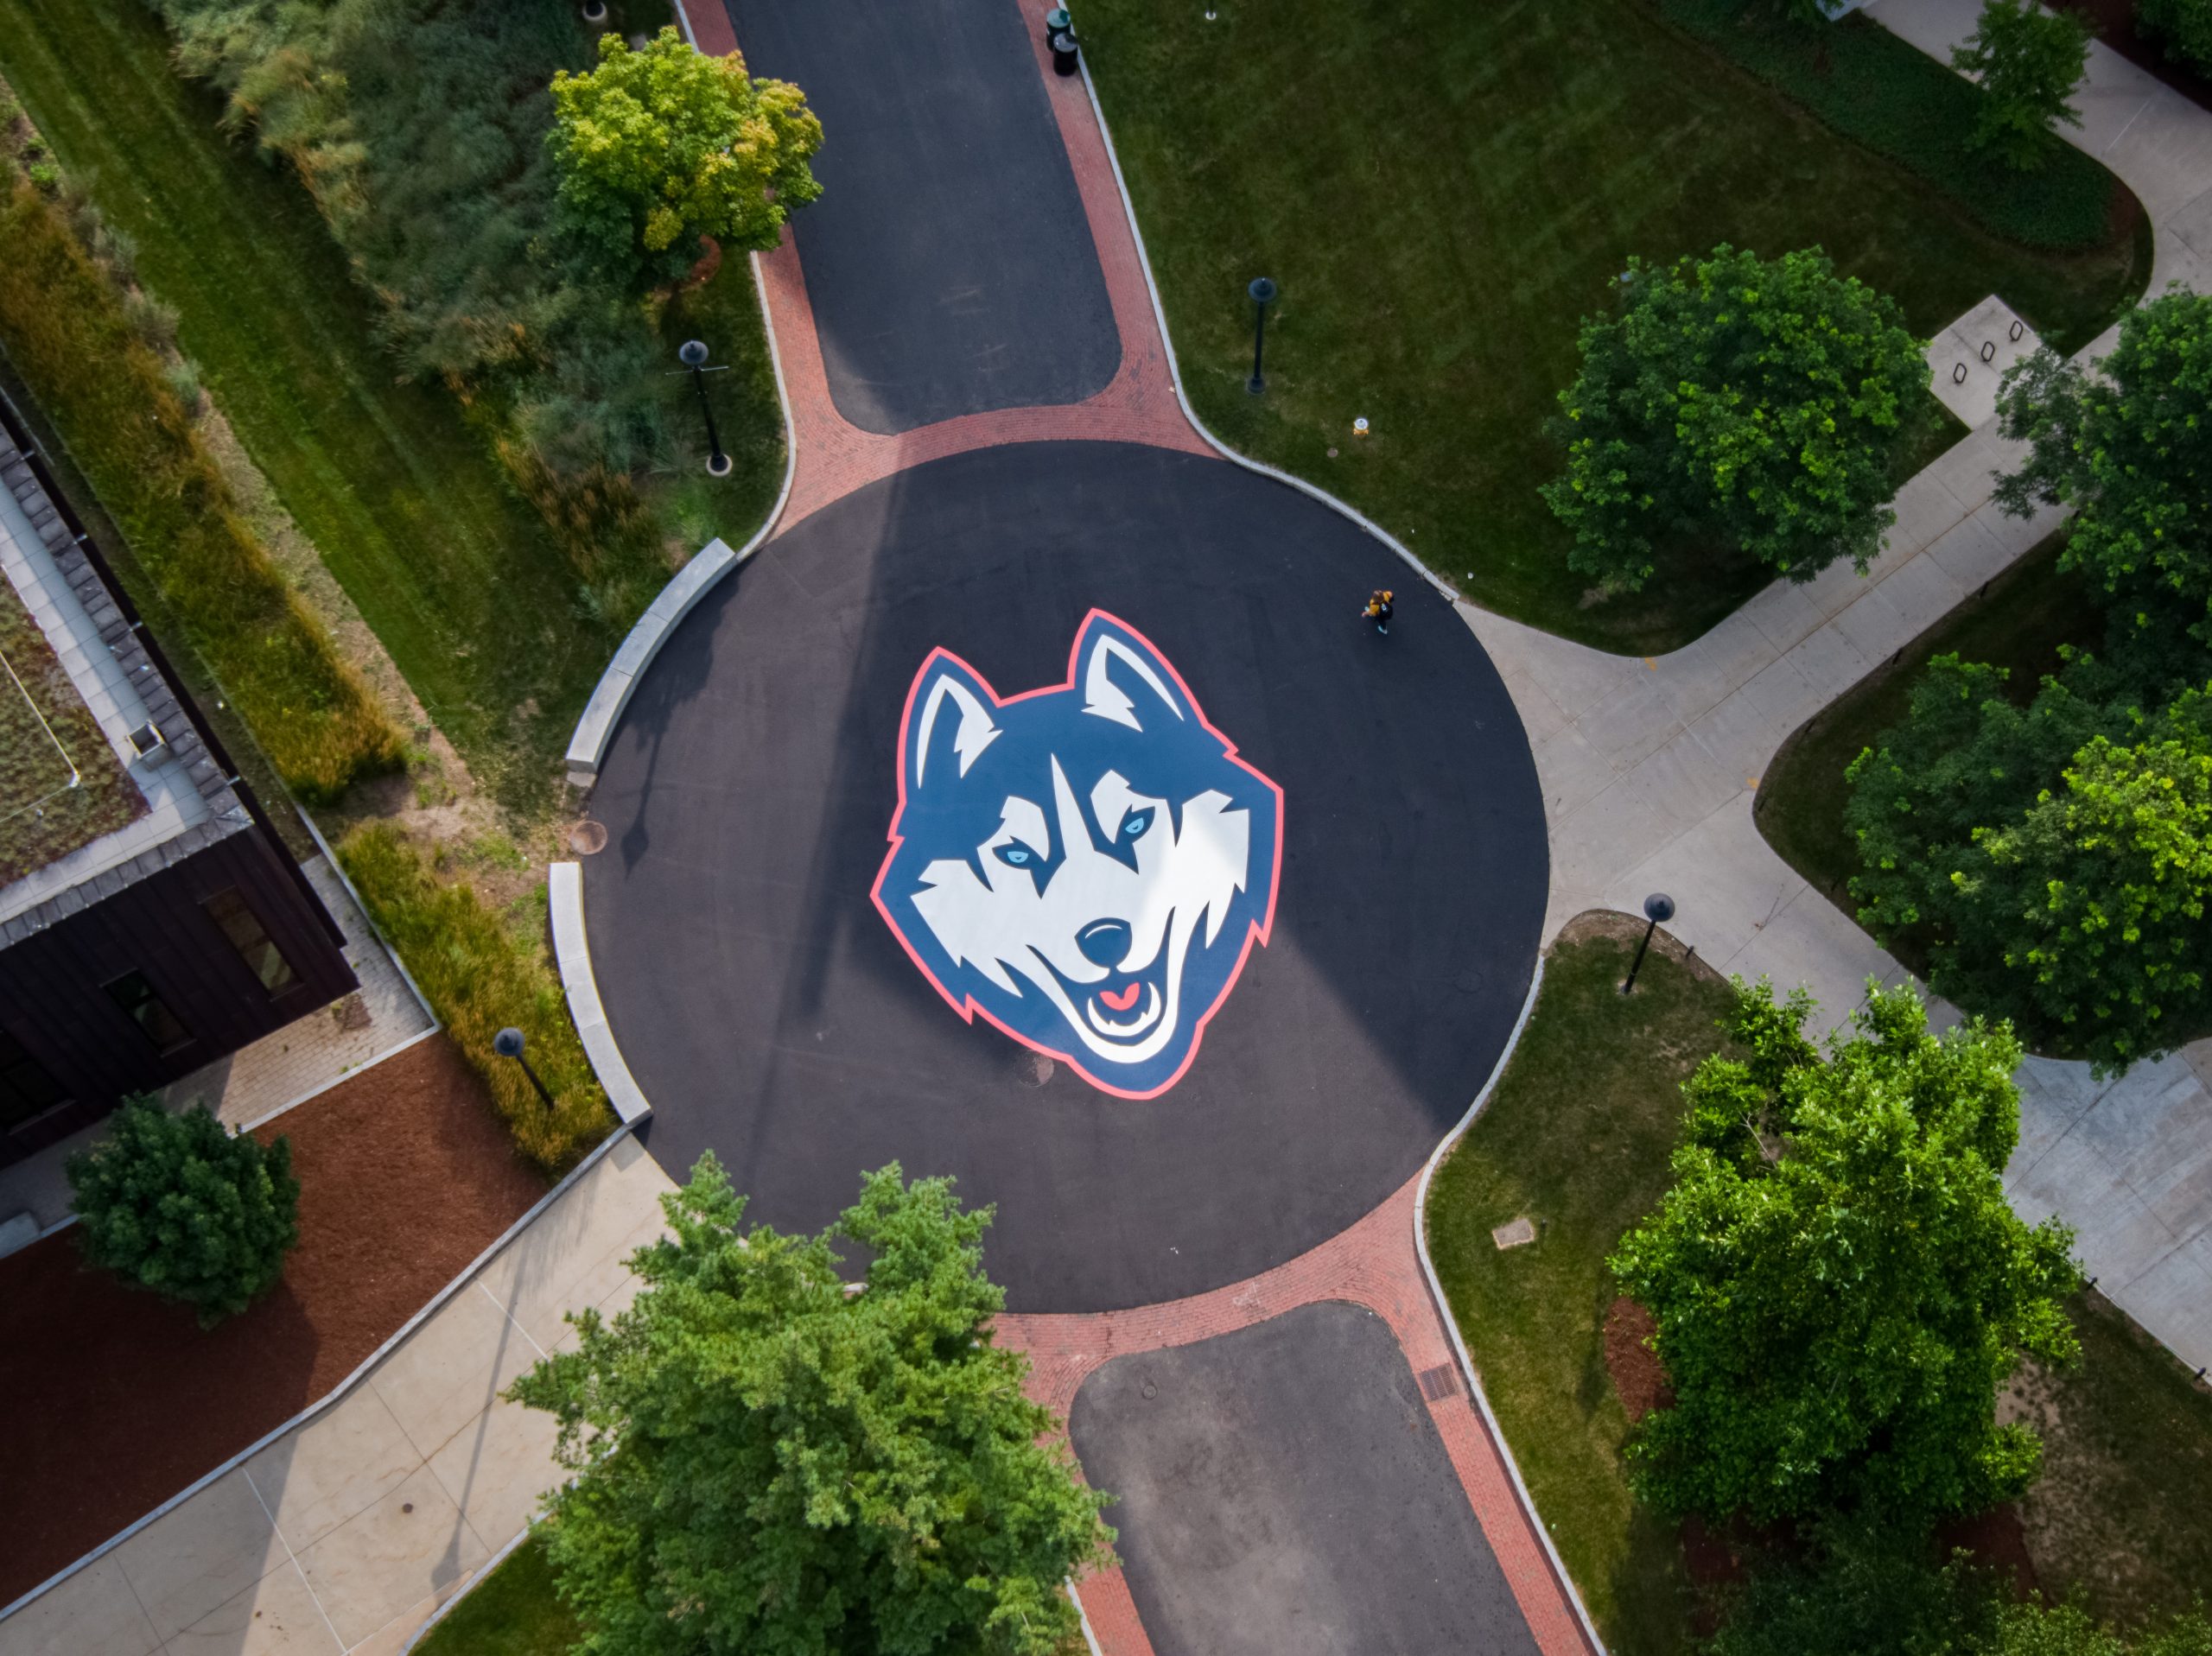 The husky dog logo painted on Fairfield Way viewed from above on Aug. 11, 2021. (Peter Morenus/UConn Photo)